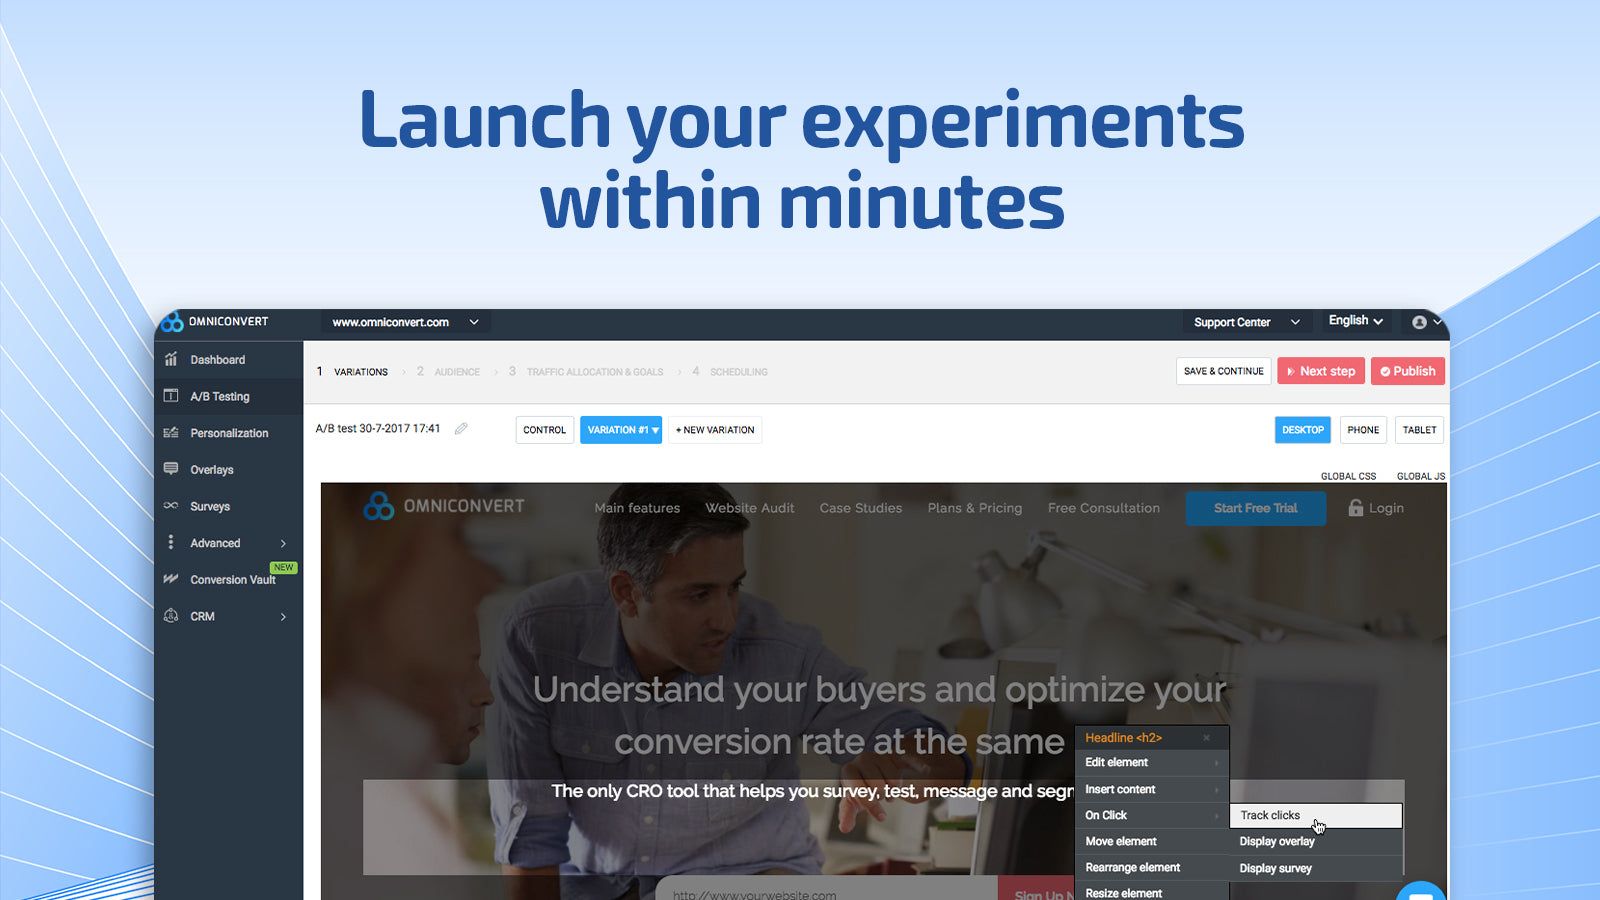 Launch AB testing experiments within minutes